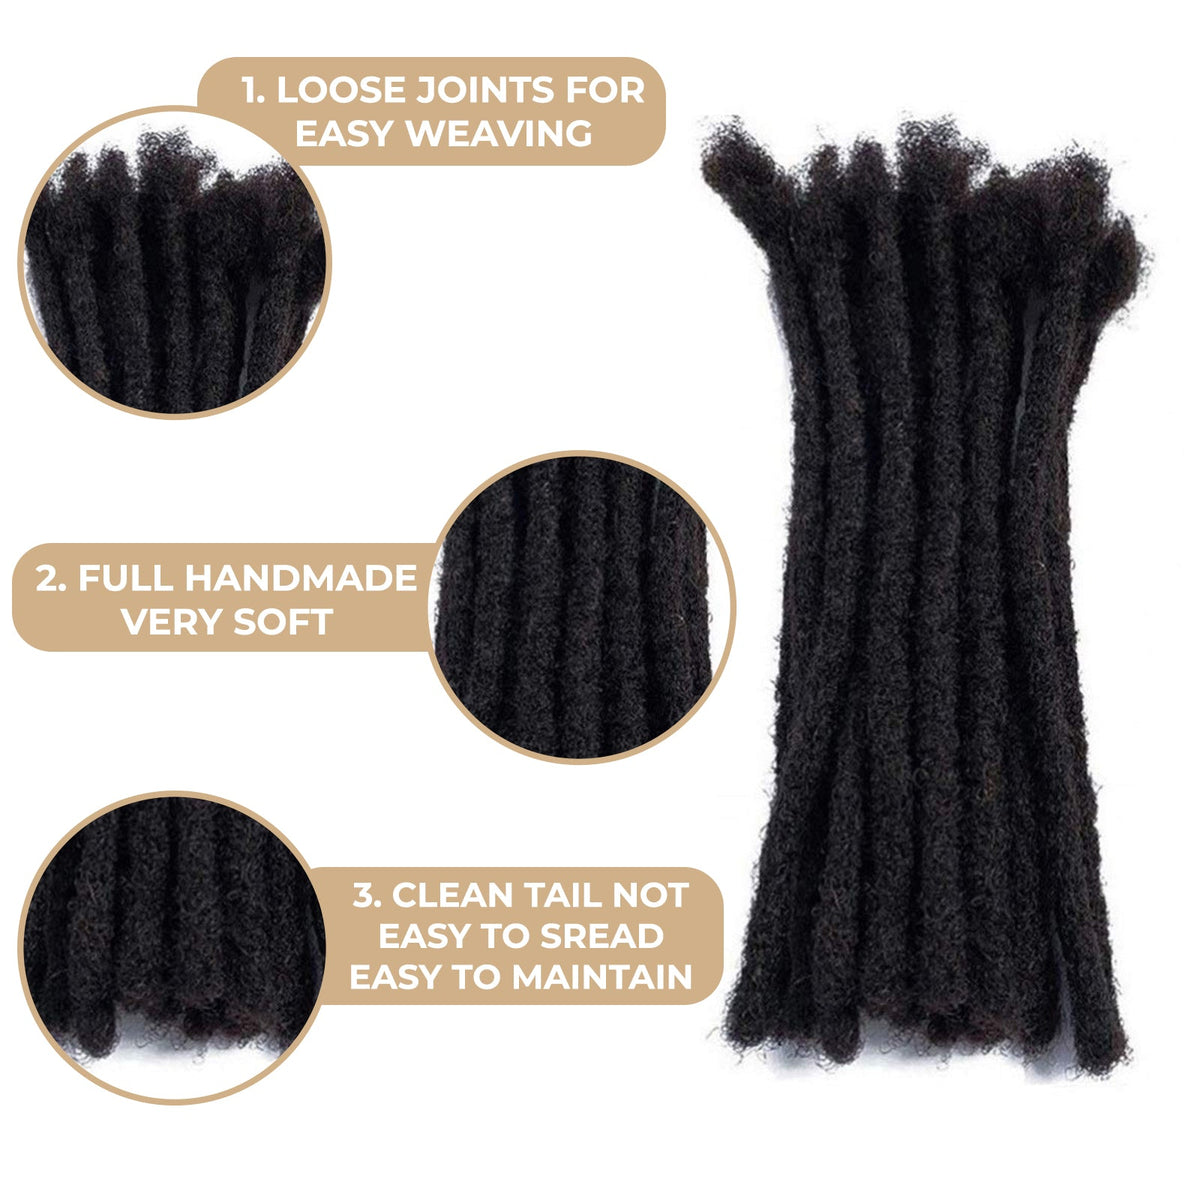 100% Human Hair Dreadlock Extensions 16Inch 10 Strands Handmade Natural Loc Extensions Human Hair Bundle Dreads Extensions For Woman&Men Can be Dyed & Bleached Natural Black 16inch length 0.2cm Width